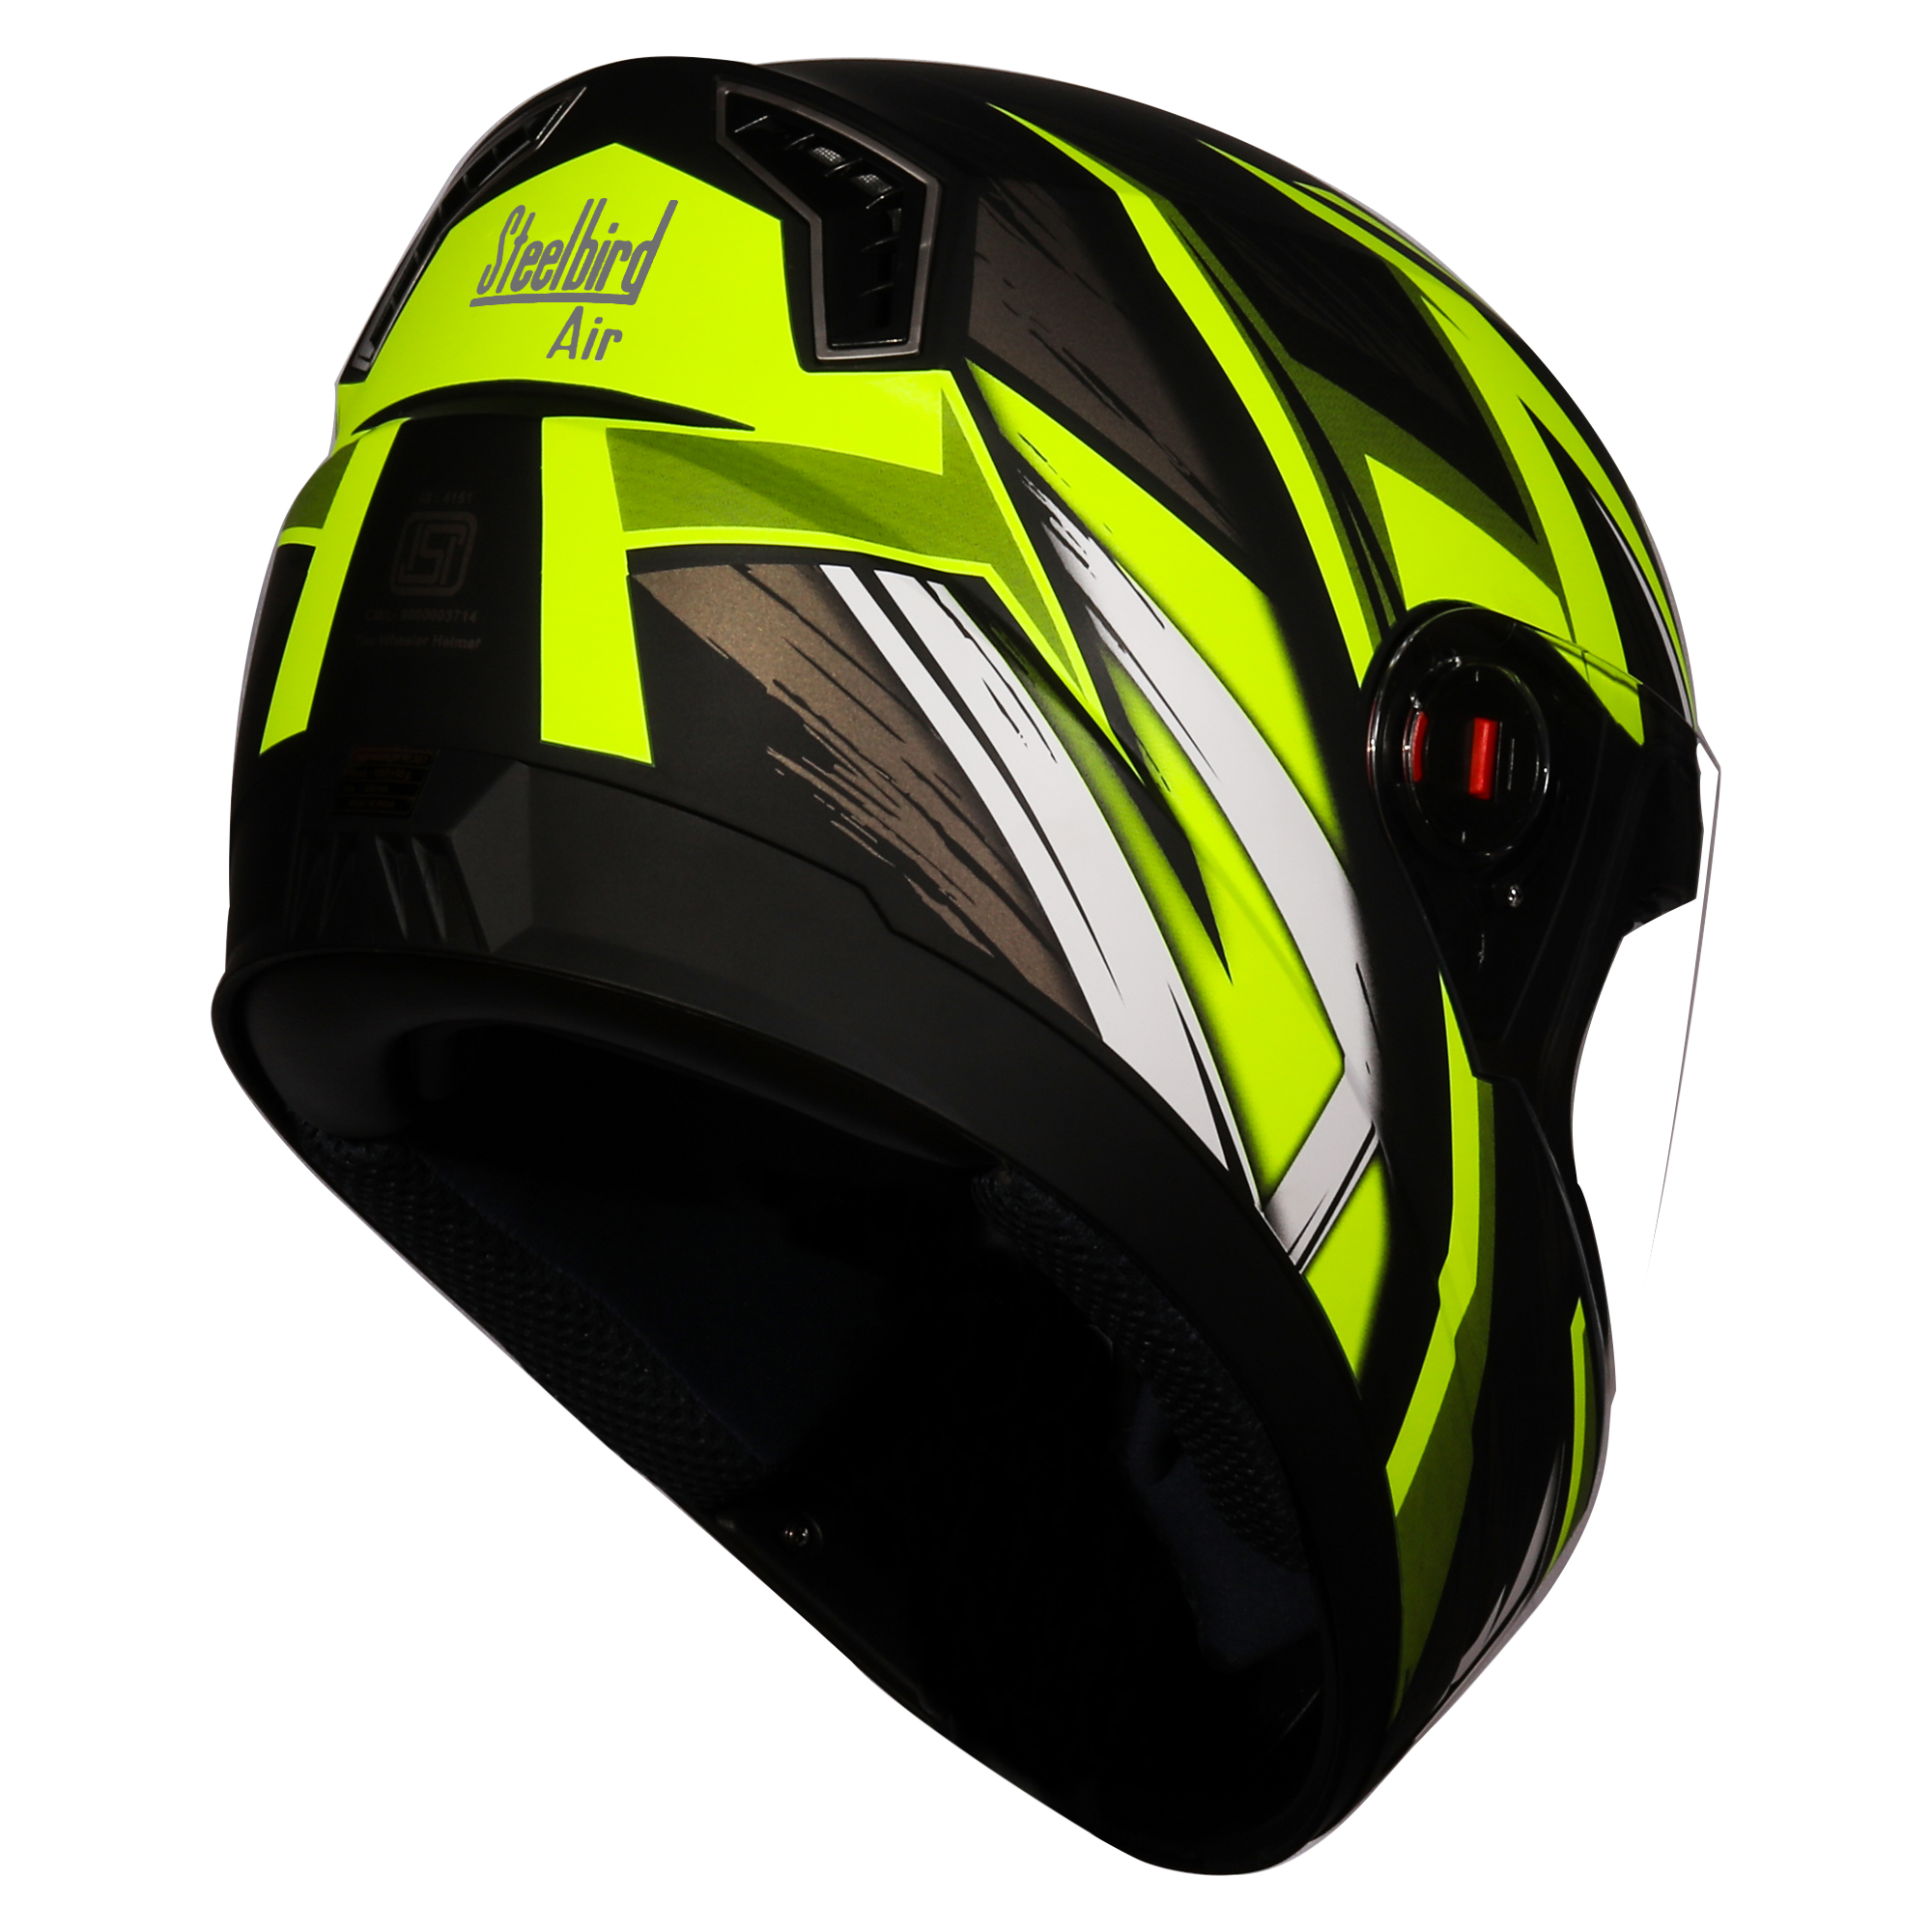 SBA-1 THRYL Mat Black With Neon Yellow ( Fitted With Clear Visor Extra Gold NIght Vision Visor Free)